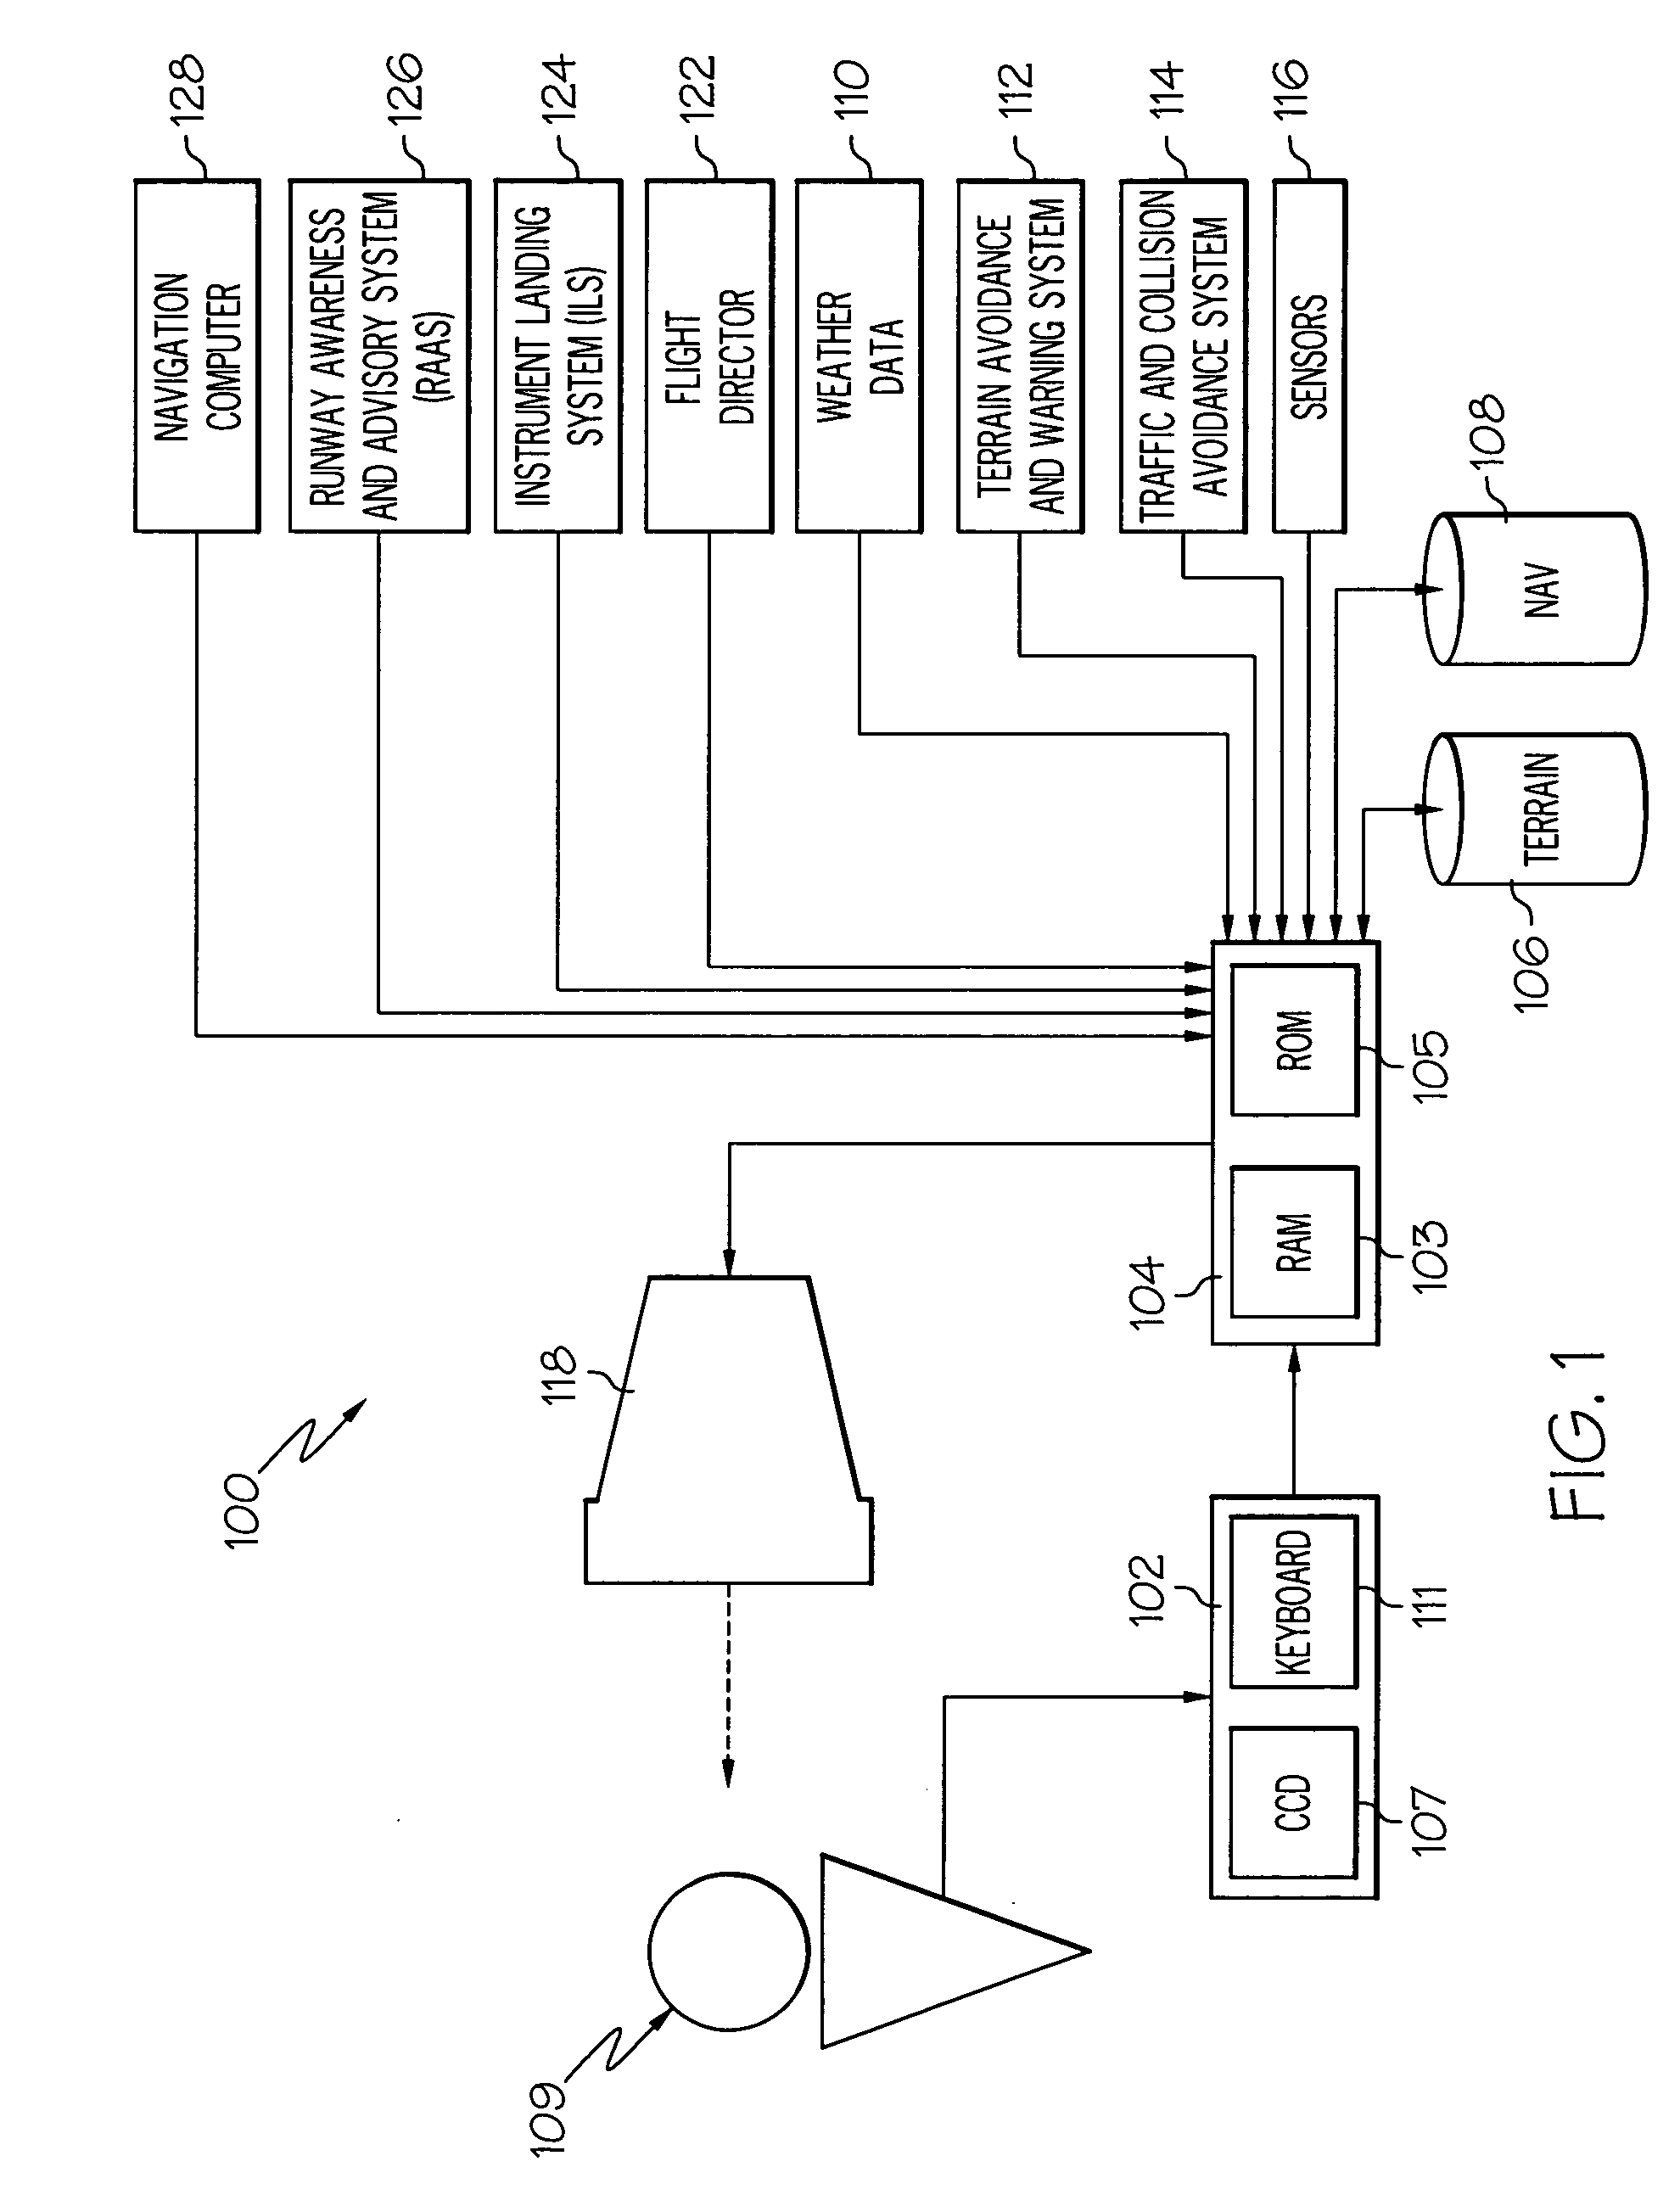 Perspective vertical situation display system and method